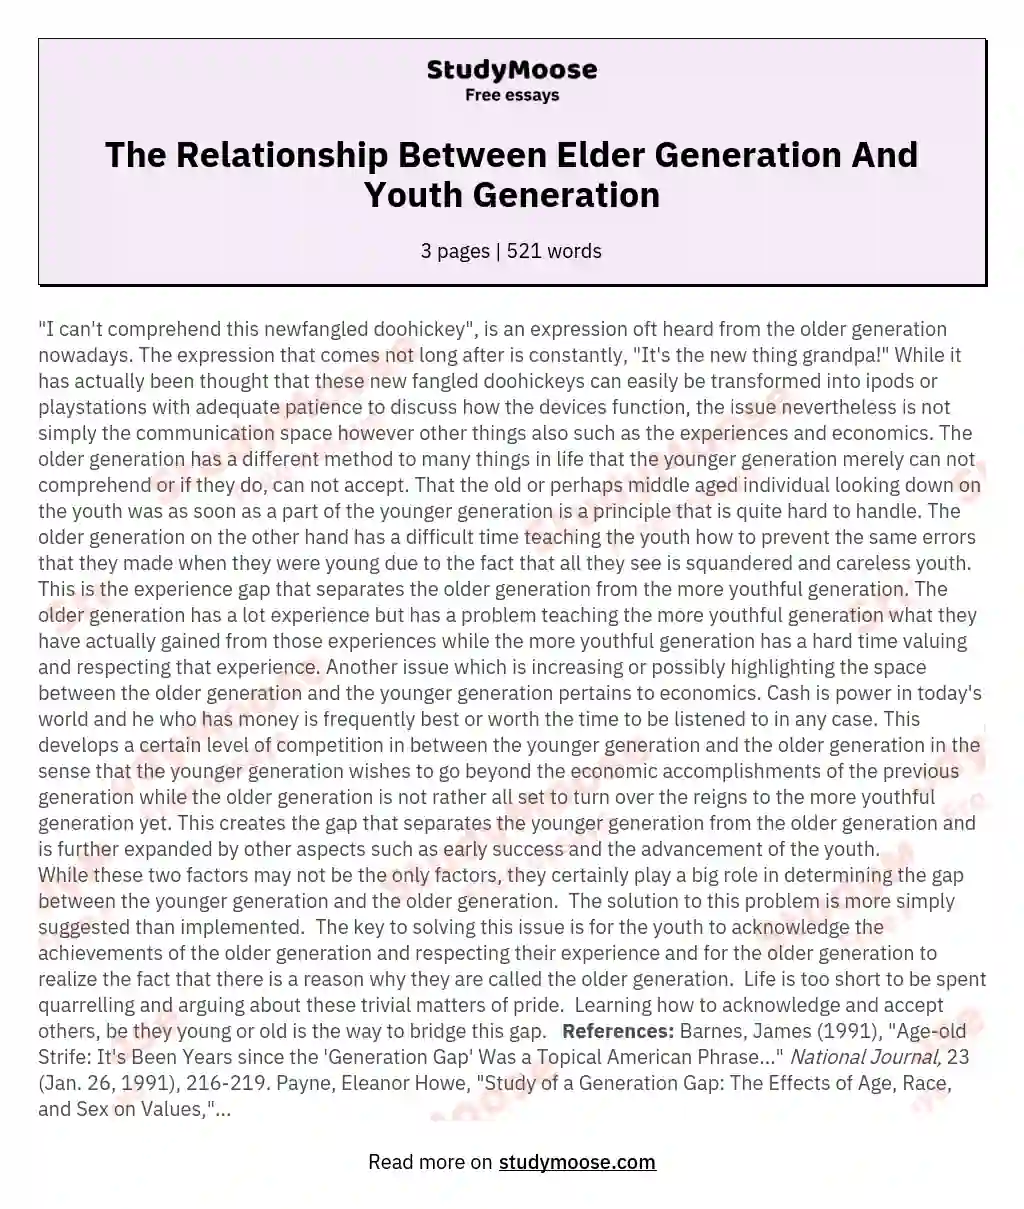 The Relationship Between Elder Generation And Youth Generation